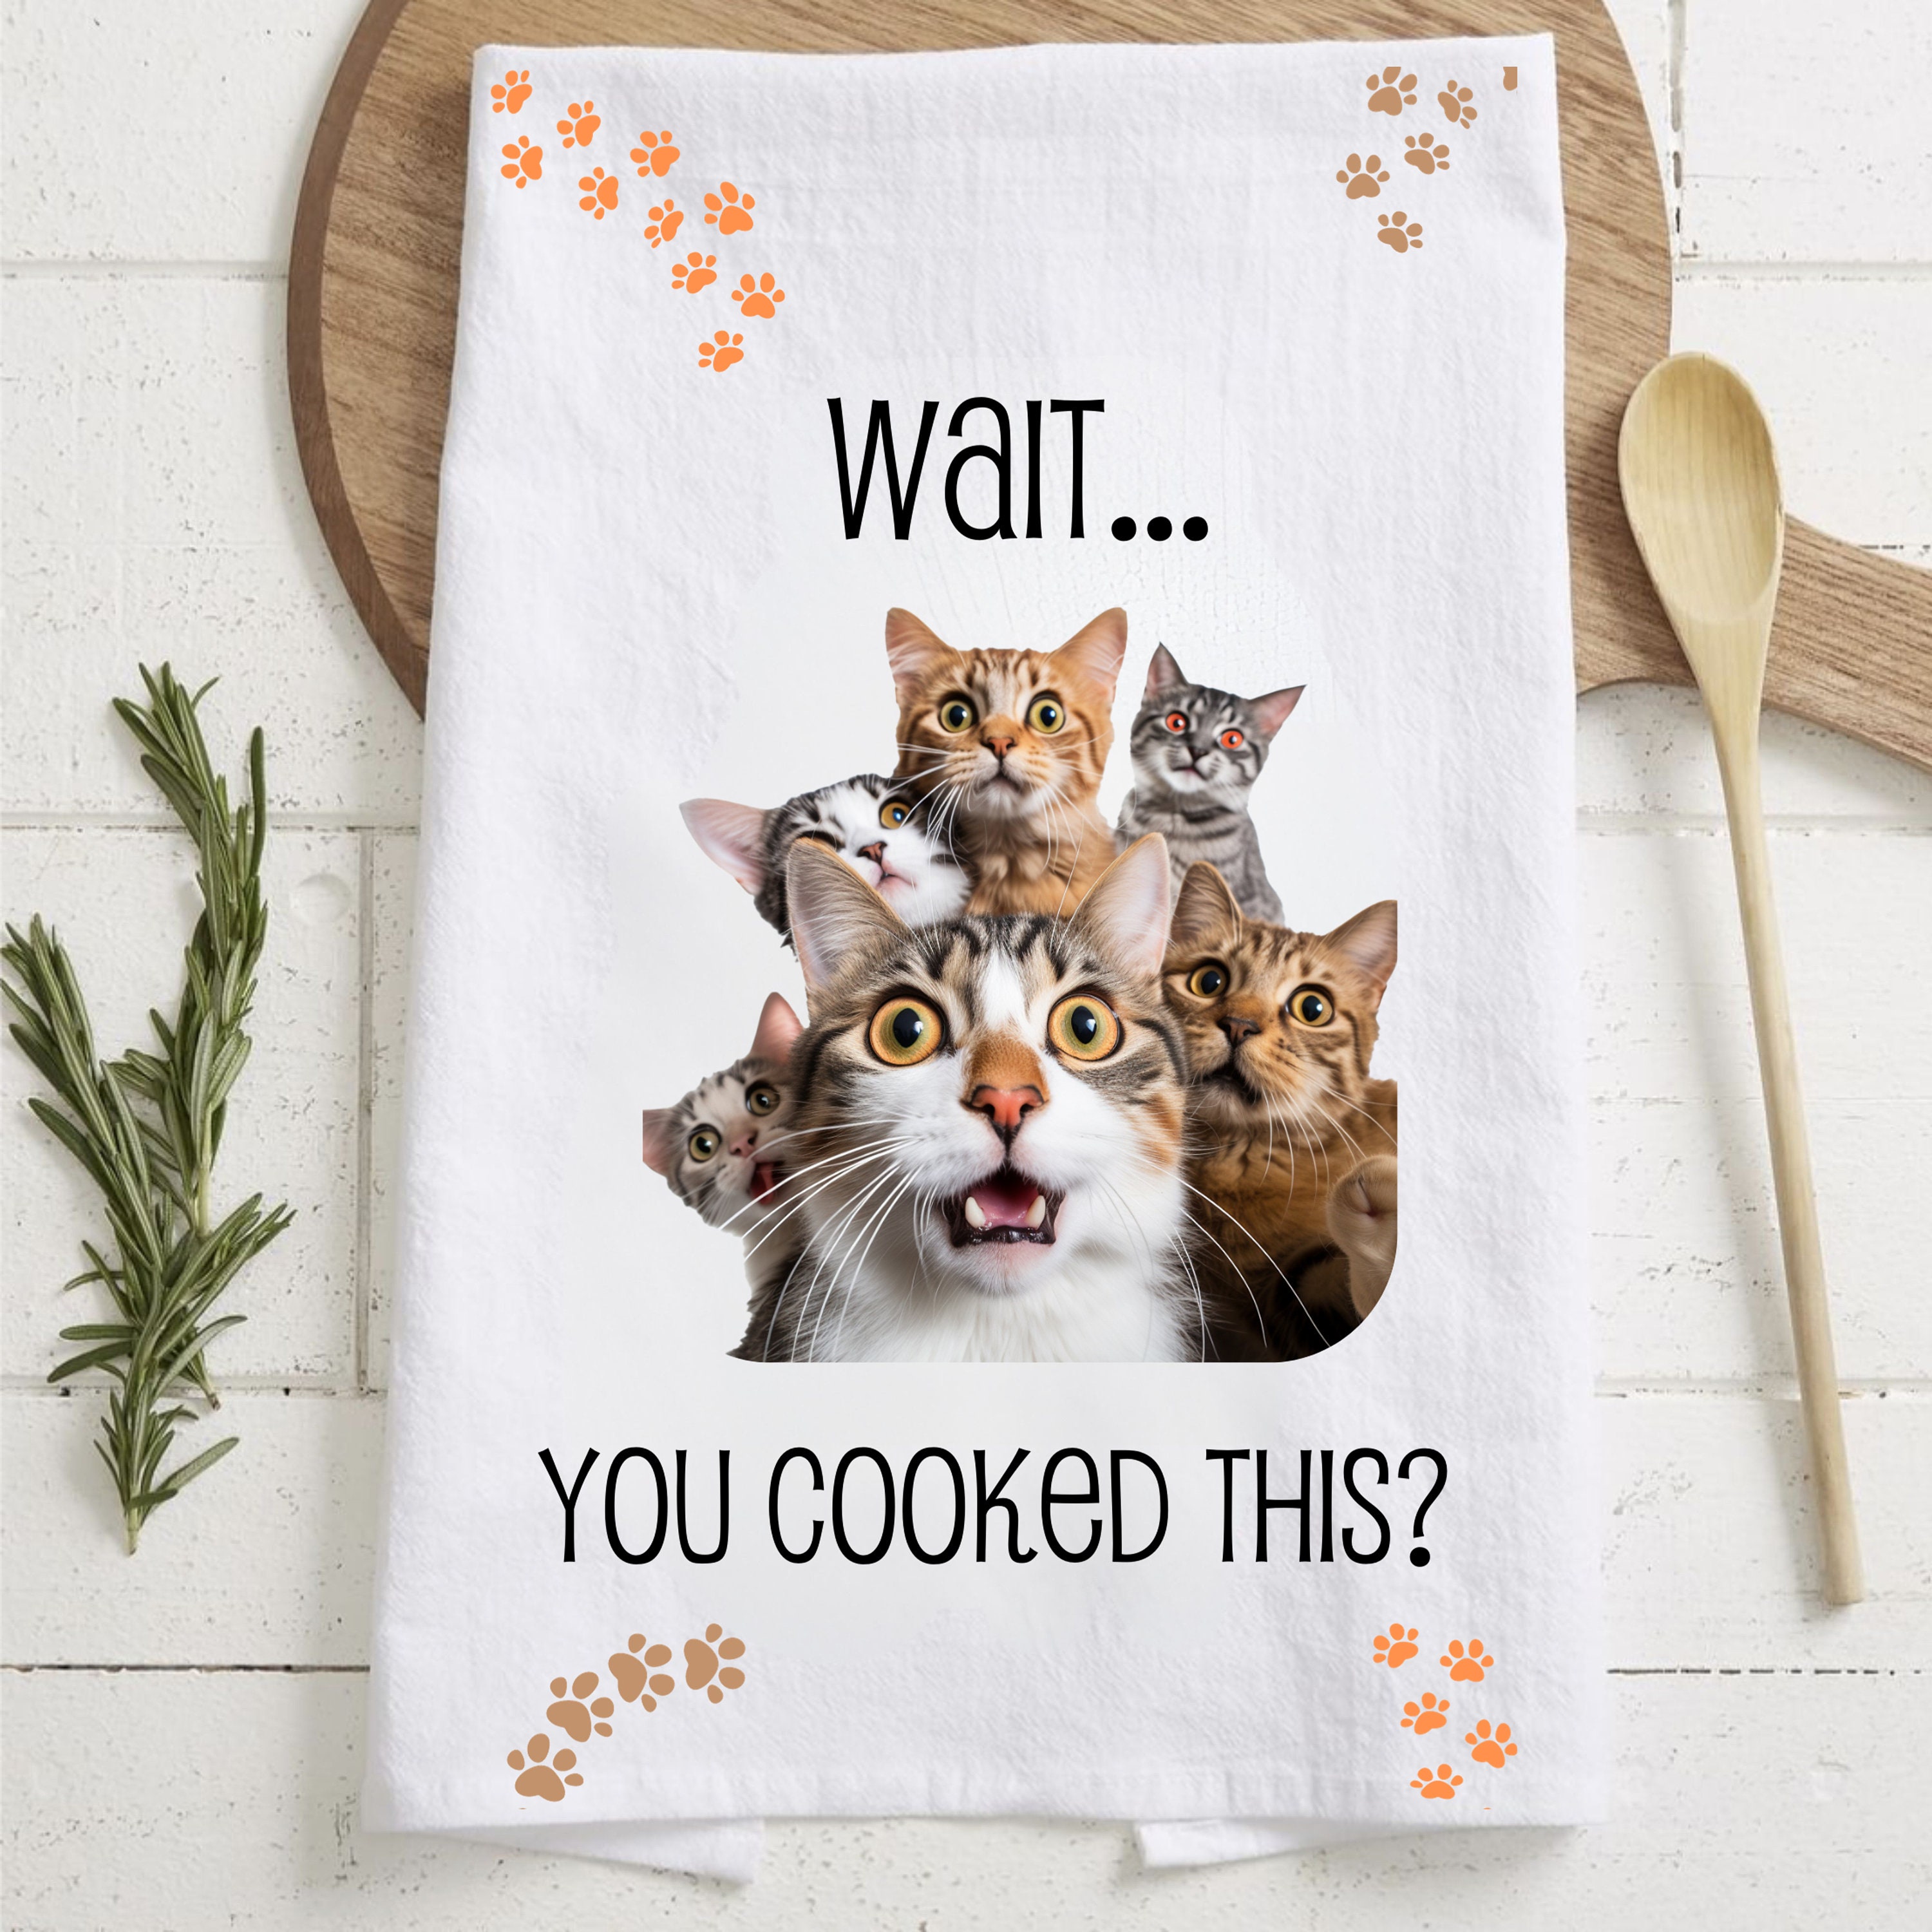 Cat Funny Hand Towels for Bathroom Kitchen - Cute Decorative Cat Decor  Hanging Washcloths Face Towels Super Absorbent Soft- Housewarming Gift for  Cat Lovers - Gray 